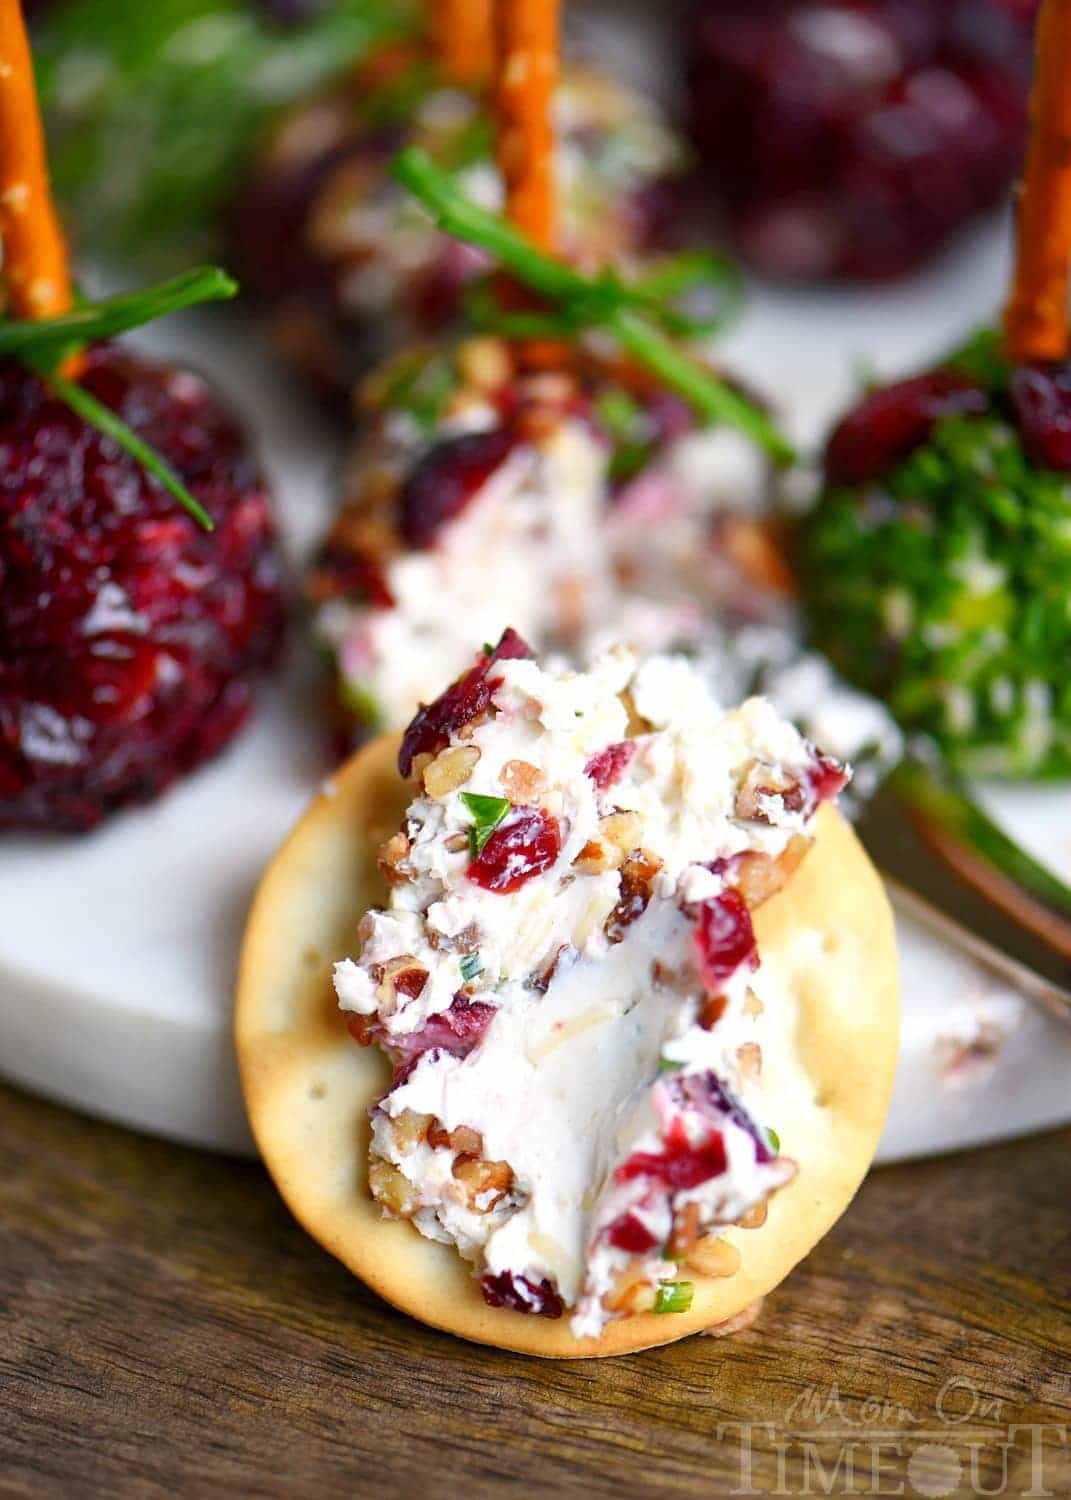 Holiday entertaining has never been easier or more delicious with these Cranberry Pecan Mini Goat Cheese Balls! So easy to make and gorgeous too! Perfect for Thanksgiving, Christmas, and New Year's! (Can be made in advance!) // Mom On Timeout